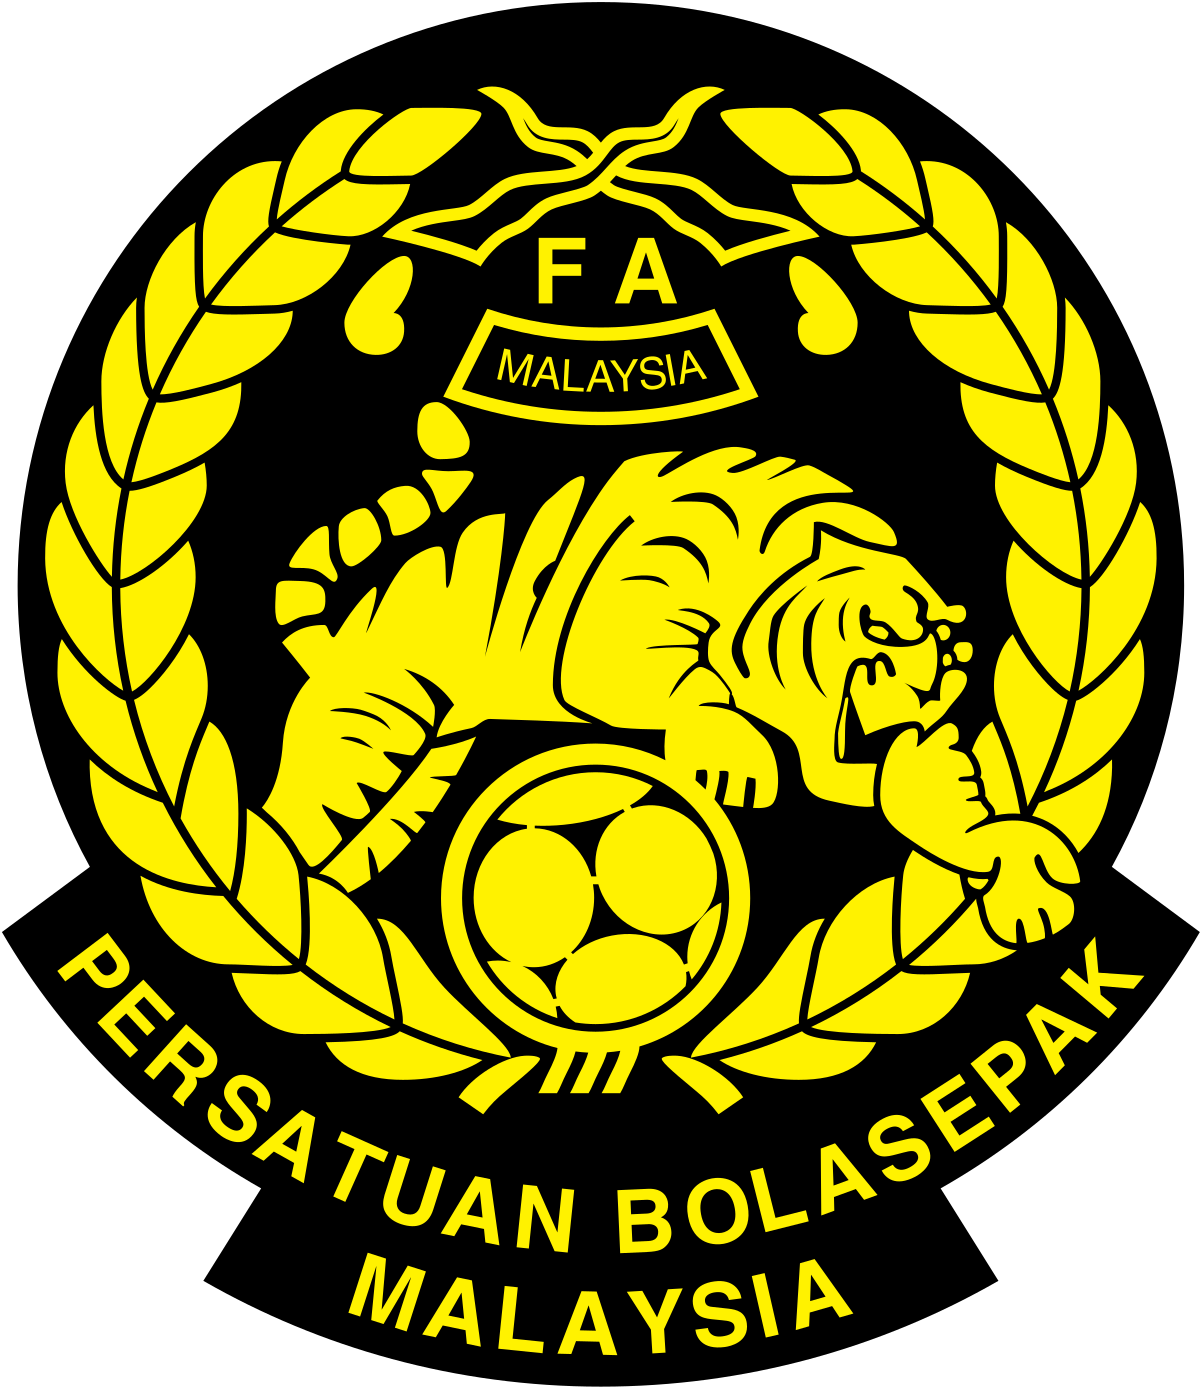 Name malaysia football national is what team of the What or